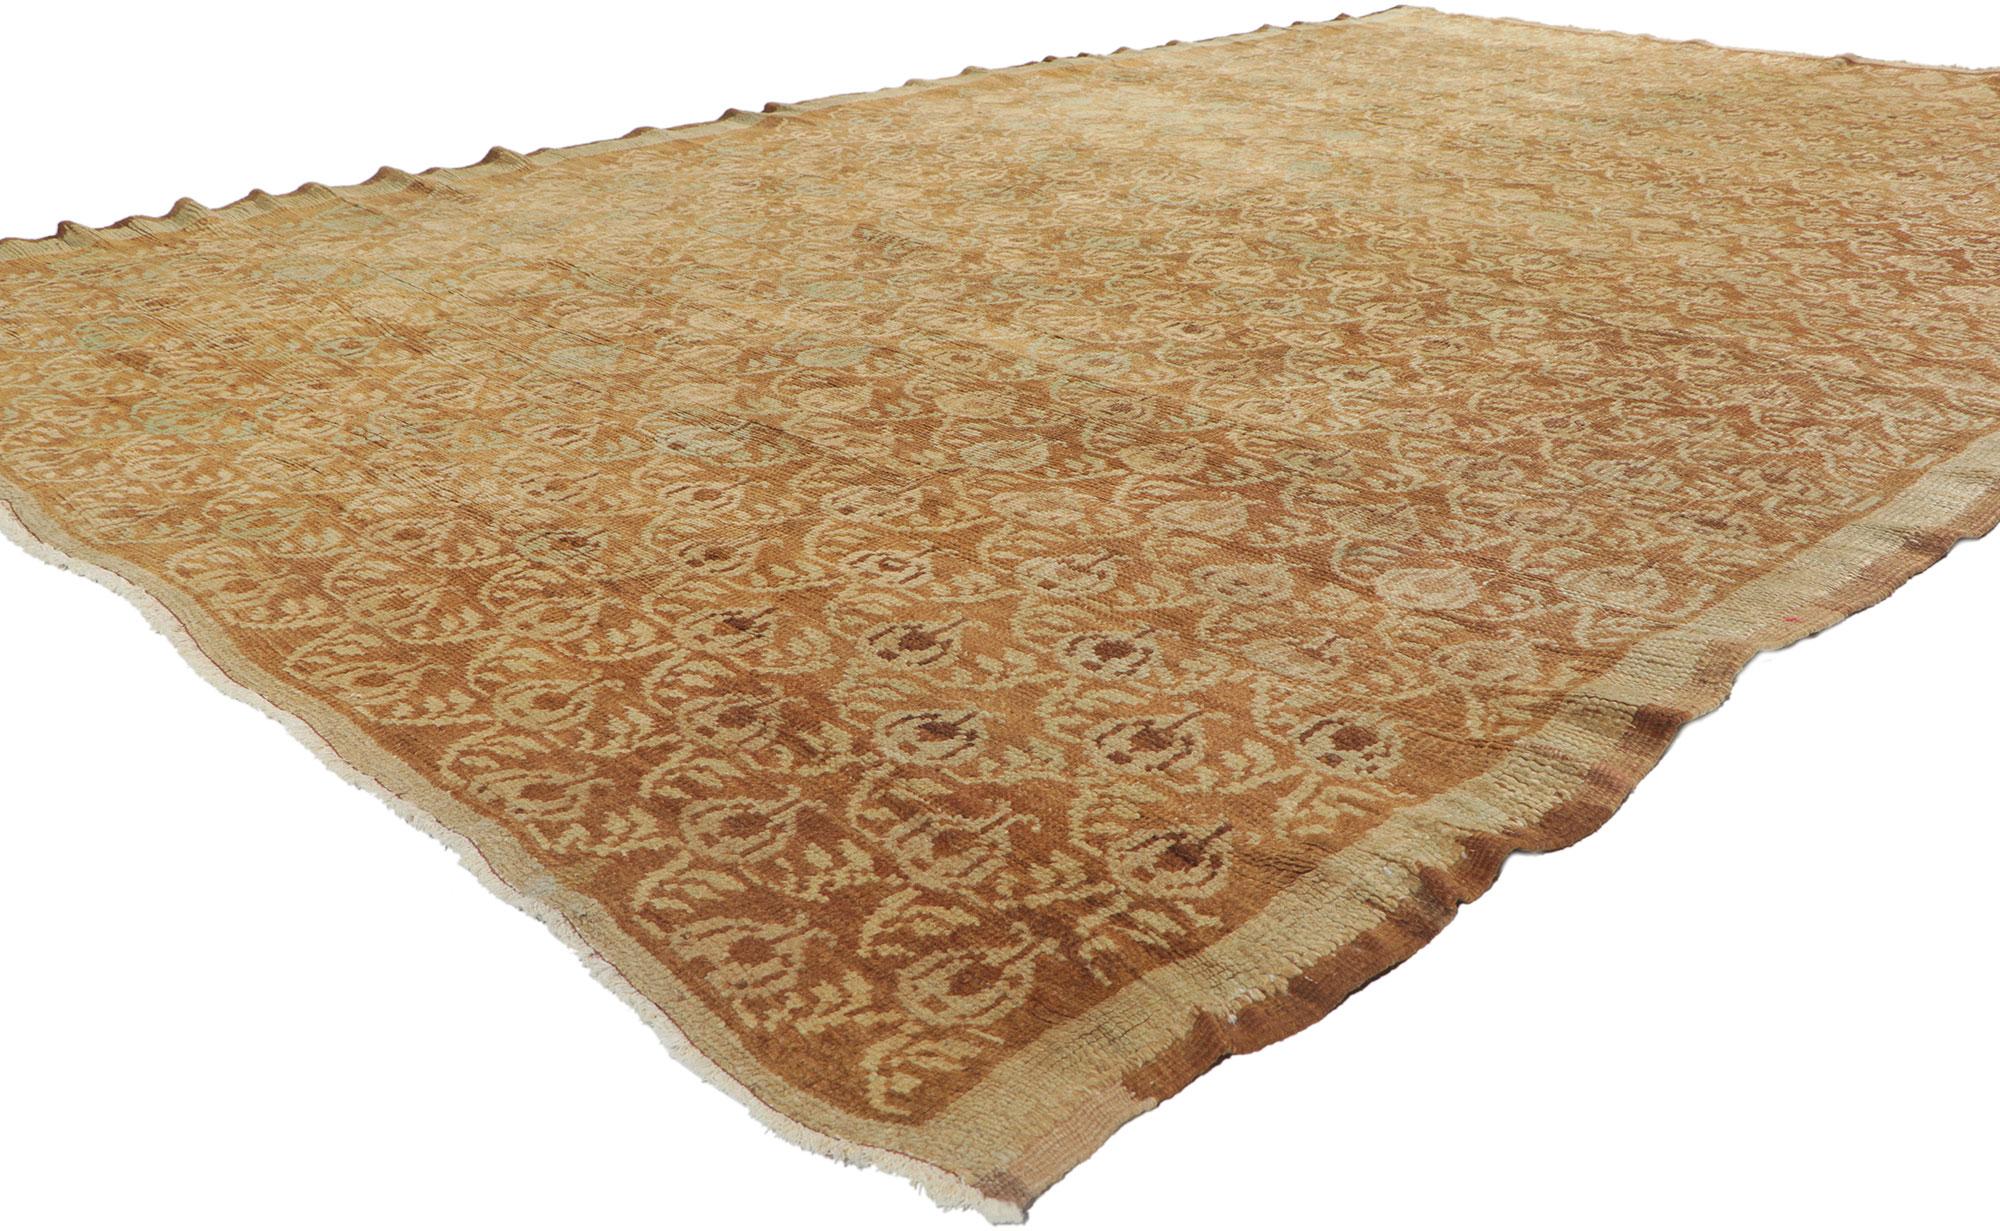 50479 Vintage Turkish Oushak Rug, 06'10 X 10'04. Antique-washed Turkish Oushak rugs are treated with a specialized washing technique designed to impart them with an antique or vintage appearance, distinguished by soft, muted tones. The aim is to